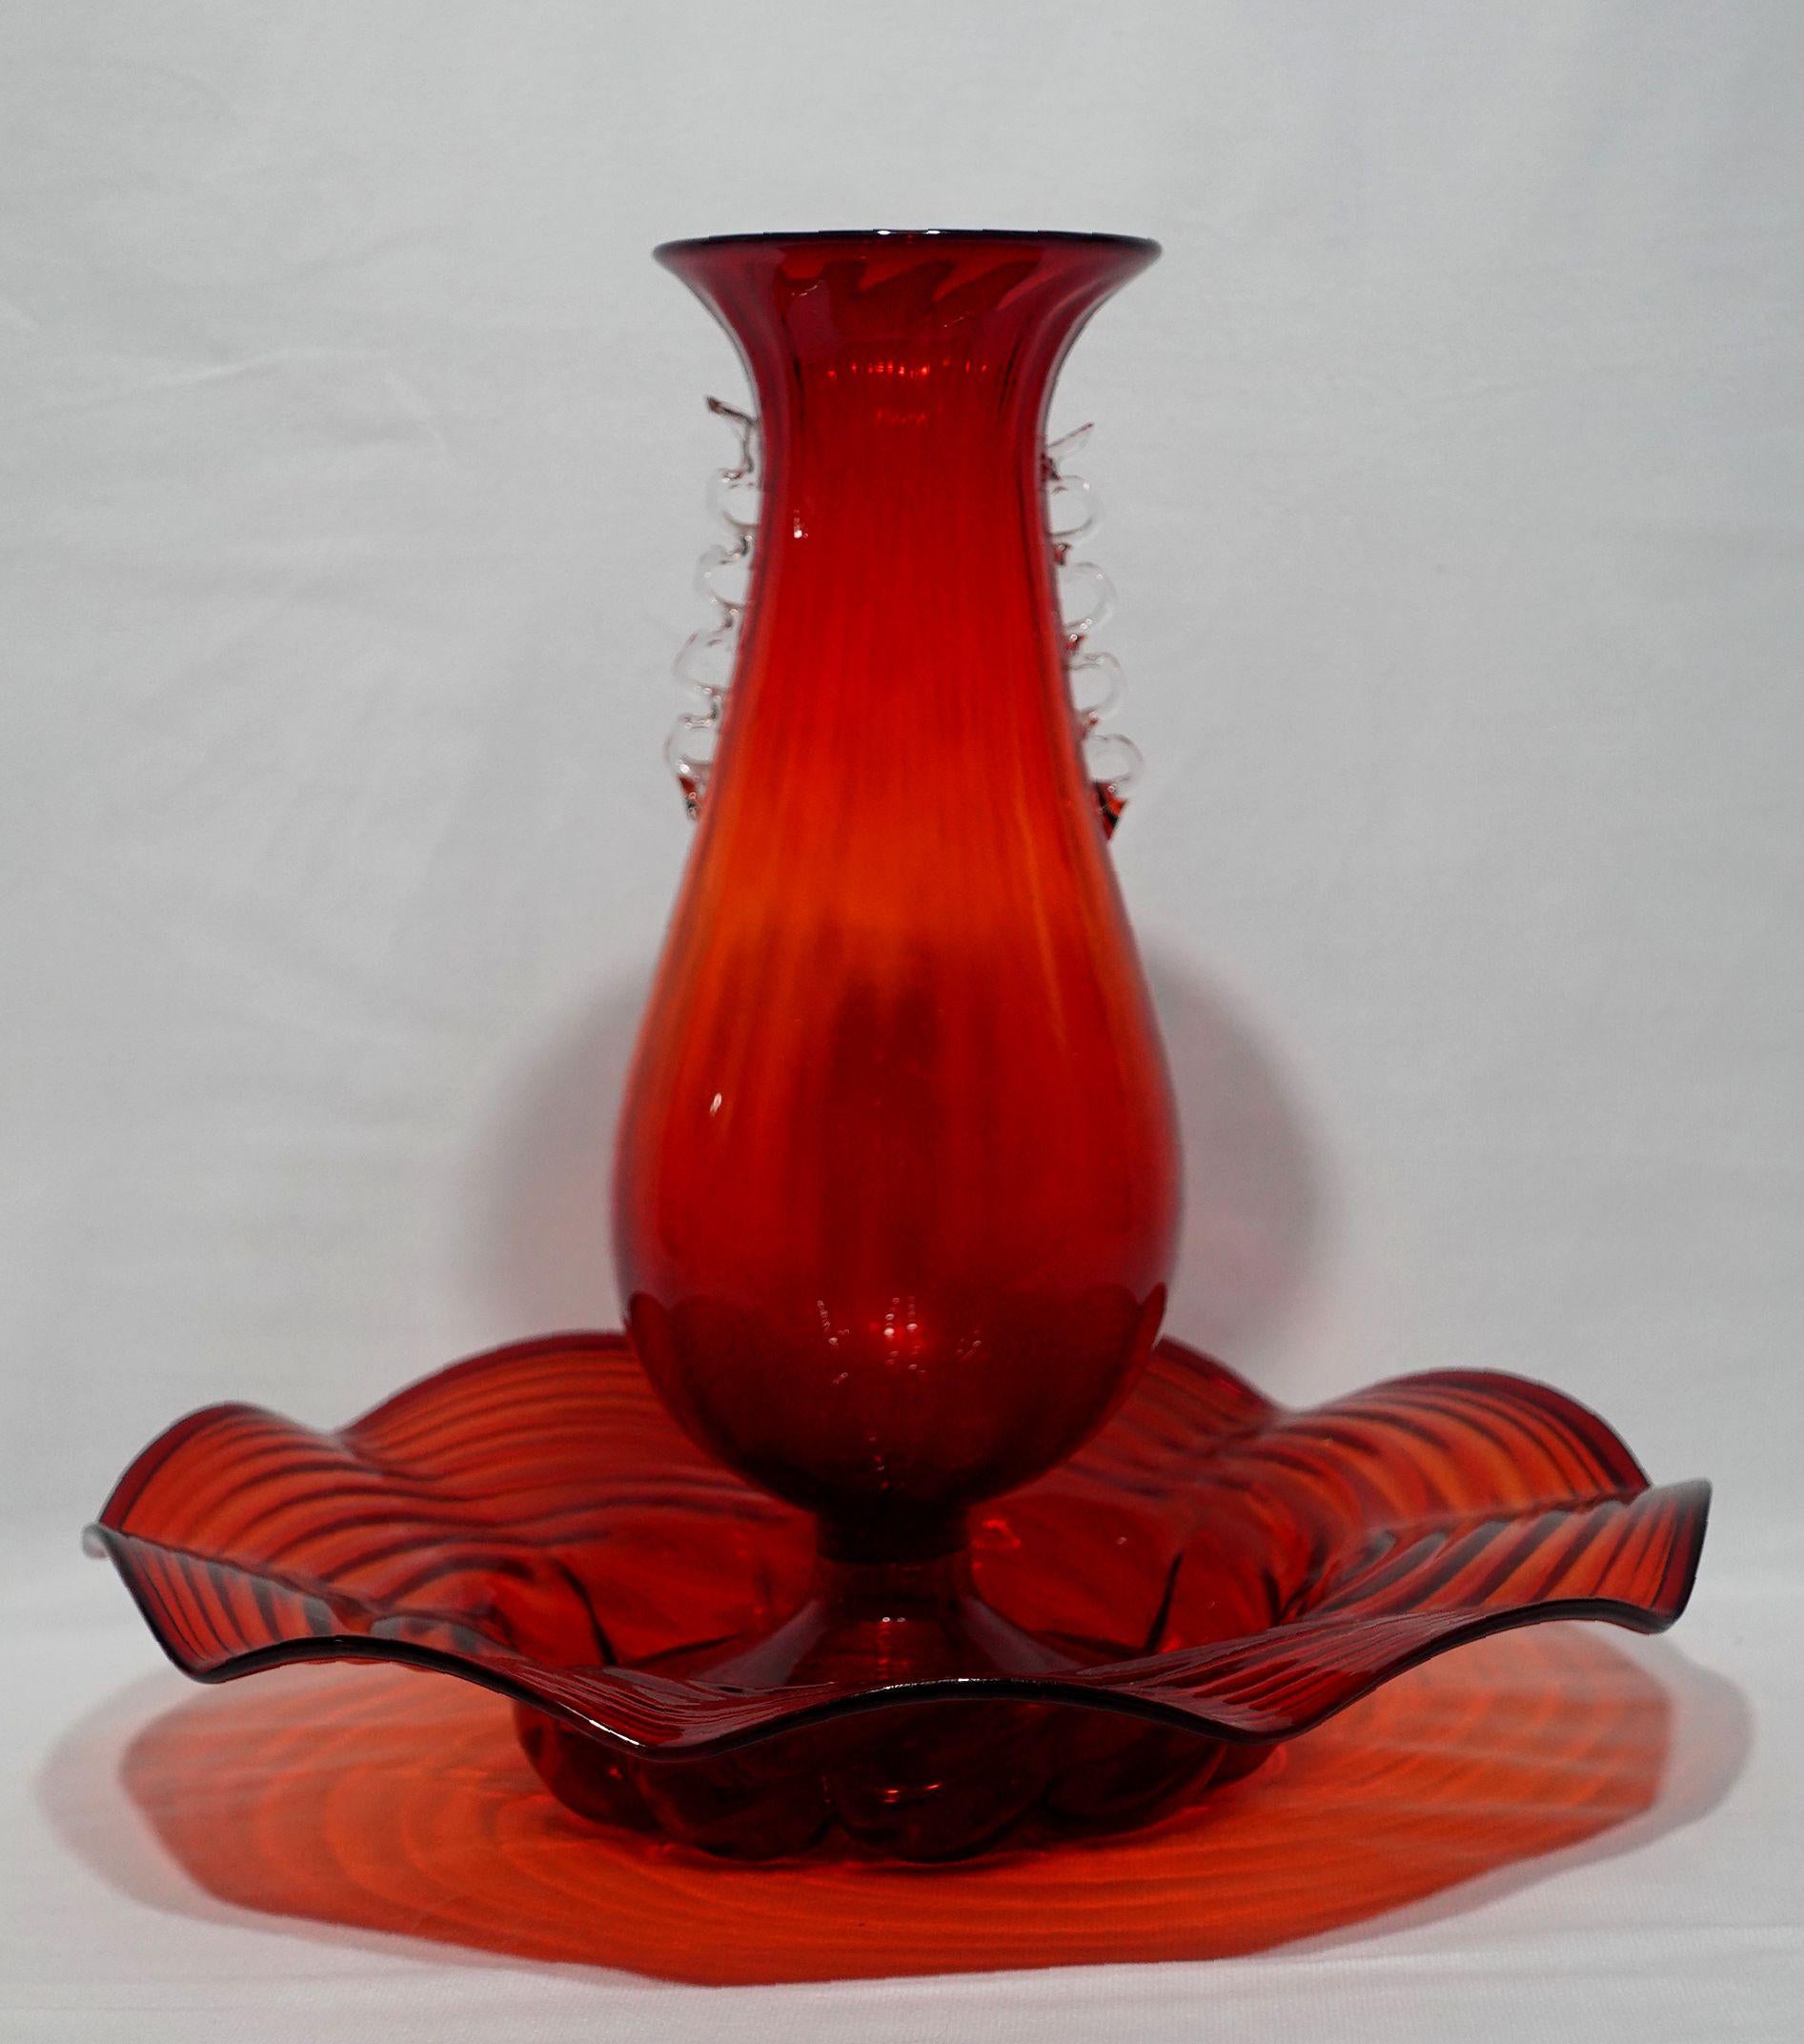 Cannellini Red Art Glass Vase and Center Bowl
vase with ribbon-form handle, on round feet, ht. 12, center bowl with scalloped rim, dia. 13 1/4 in.